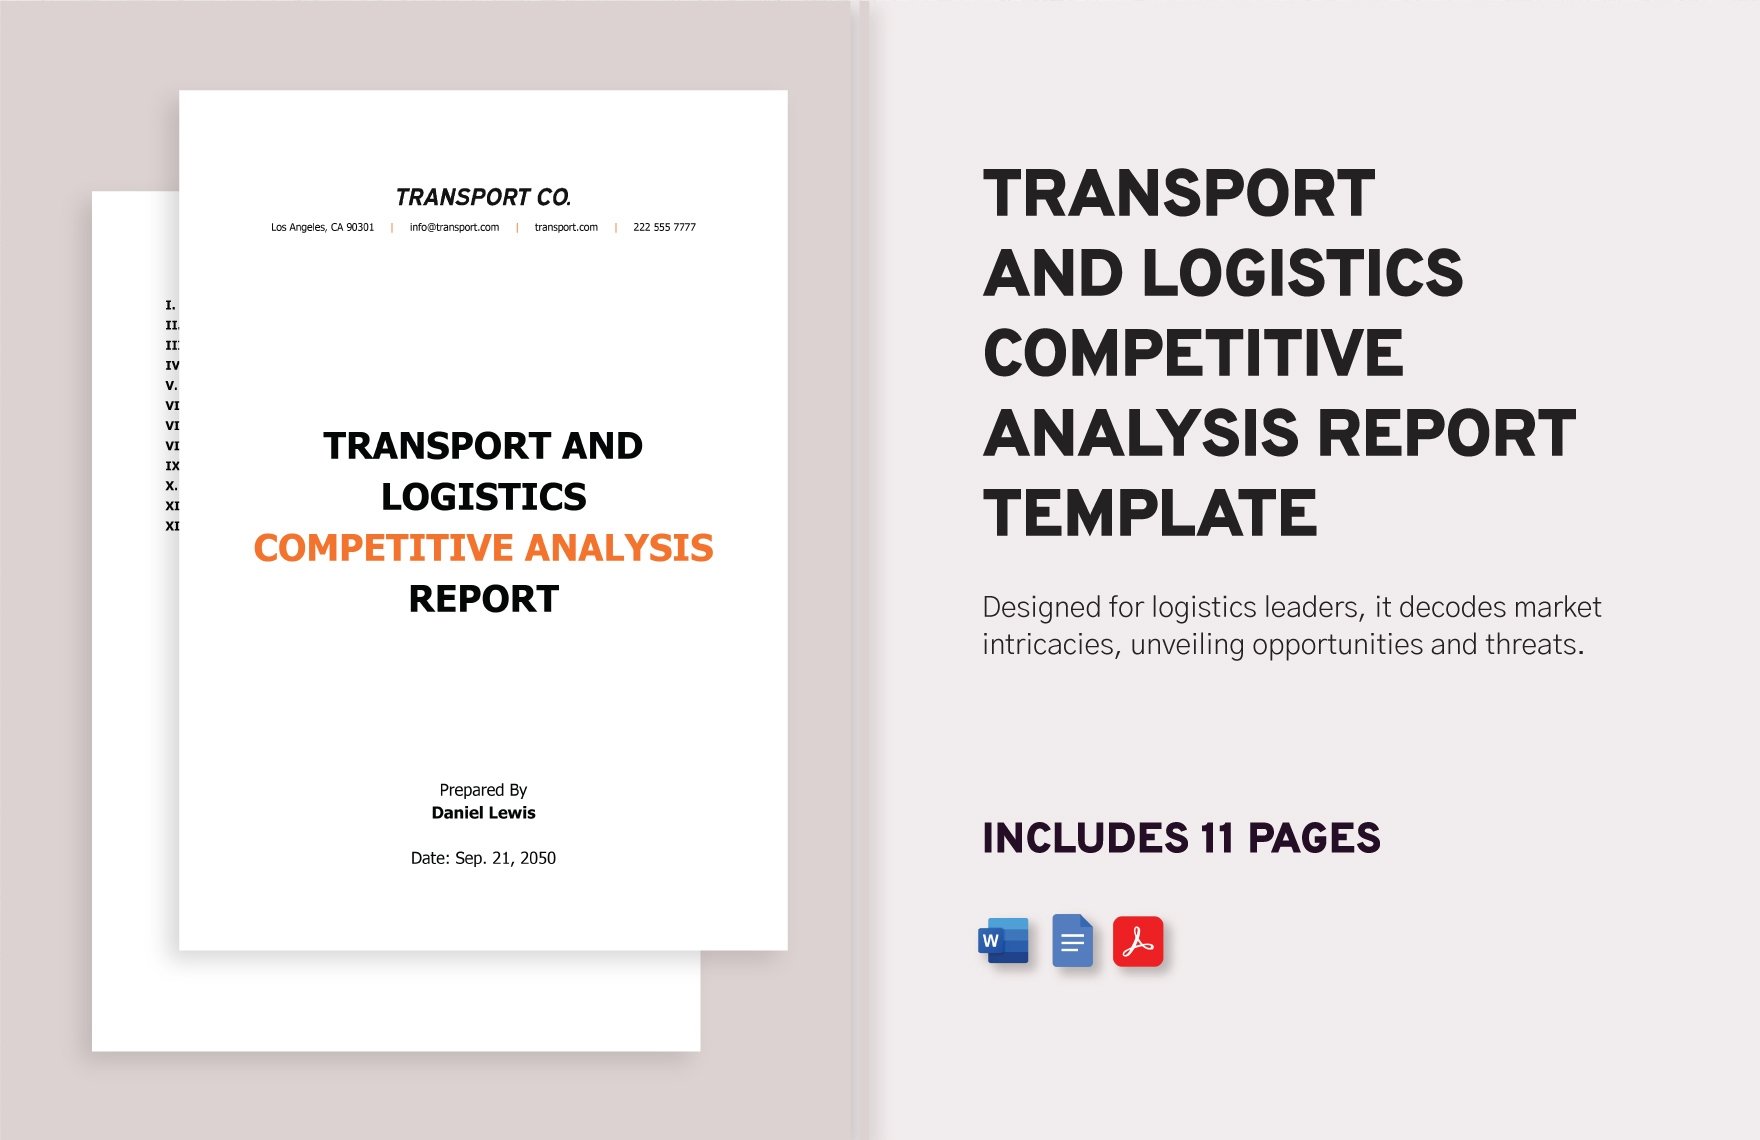 Transport and Logistics Competitive Analysis Report Template